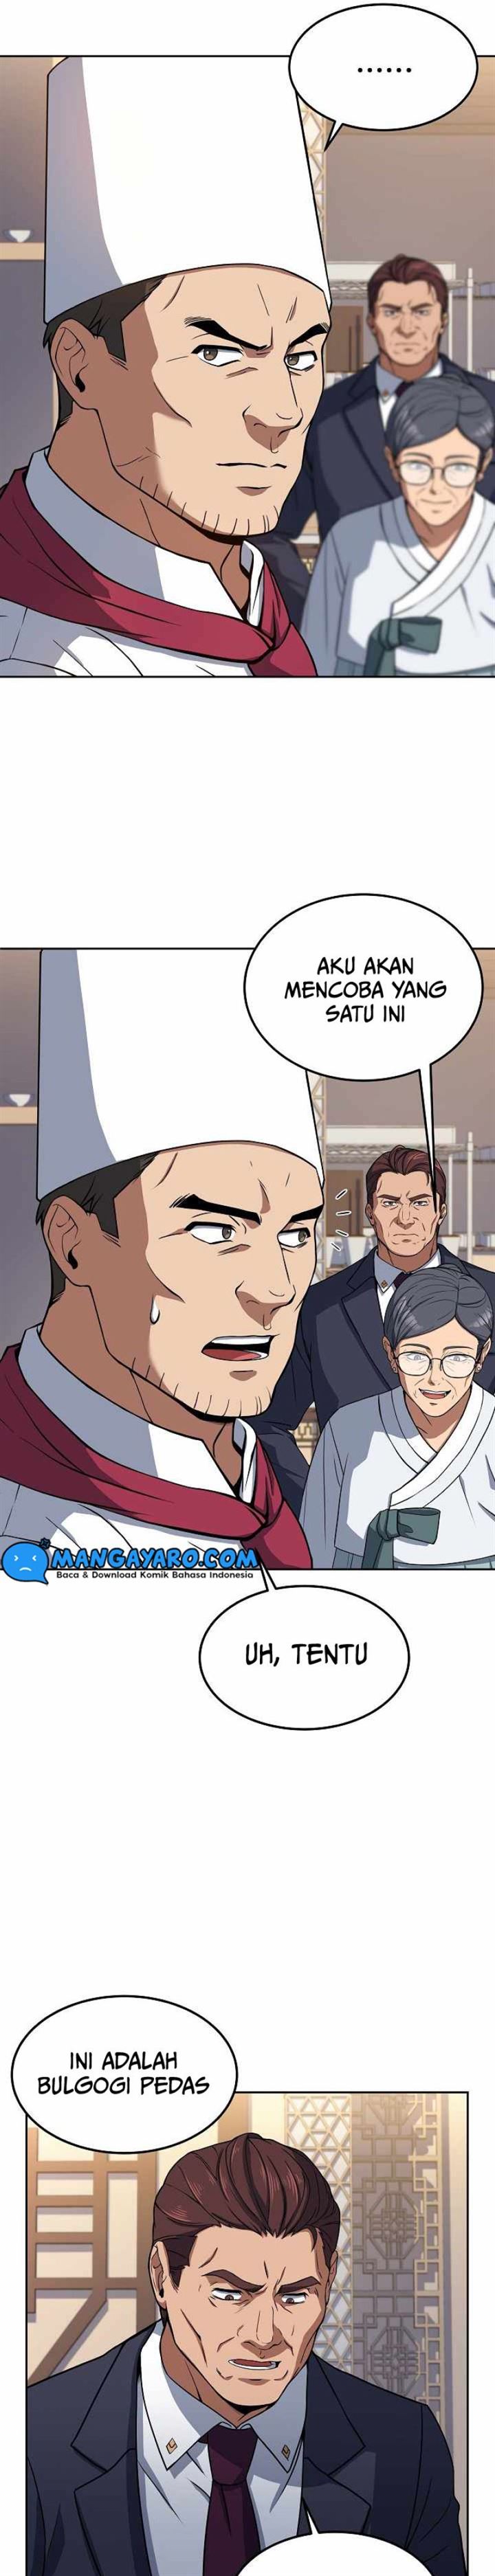 Youngest Chef From the 3rd Rate Hotel Chapter 33